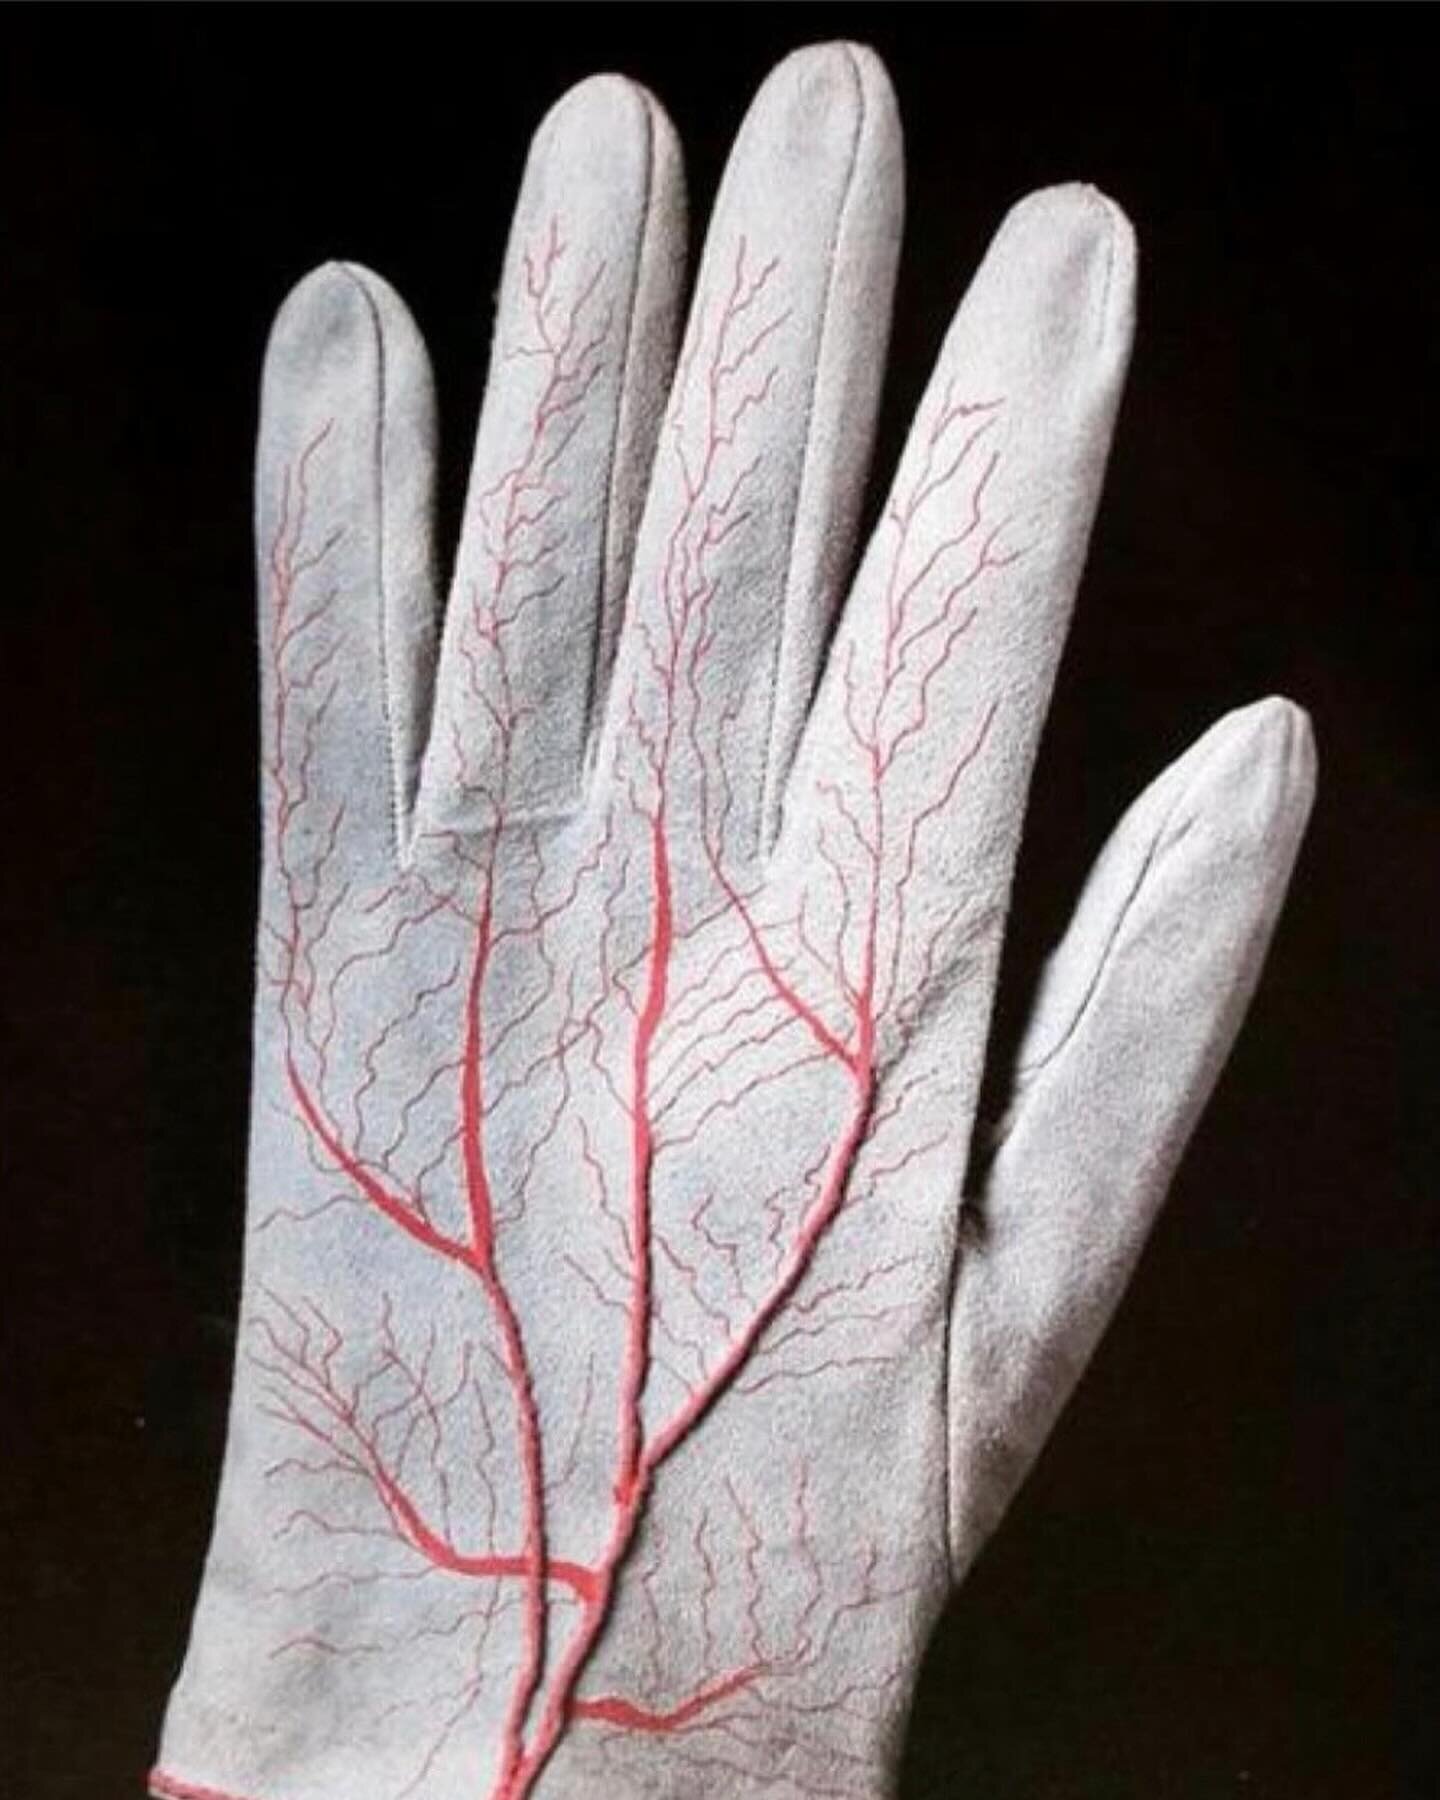 Just ran across these cool gloves by surrealist Meret Oppenheim and had to share this similar pair I made in 2018. At the time I was experiencing intense wrist and hand pain, and I made them to wear in a ritual about healing and honoring a space and 